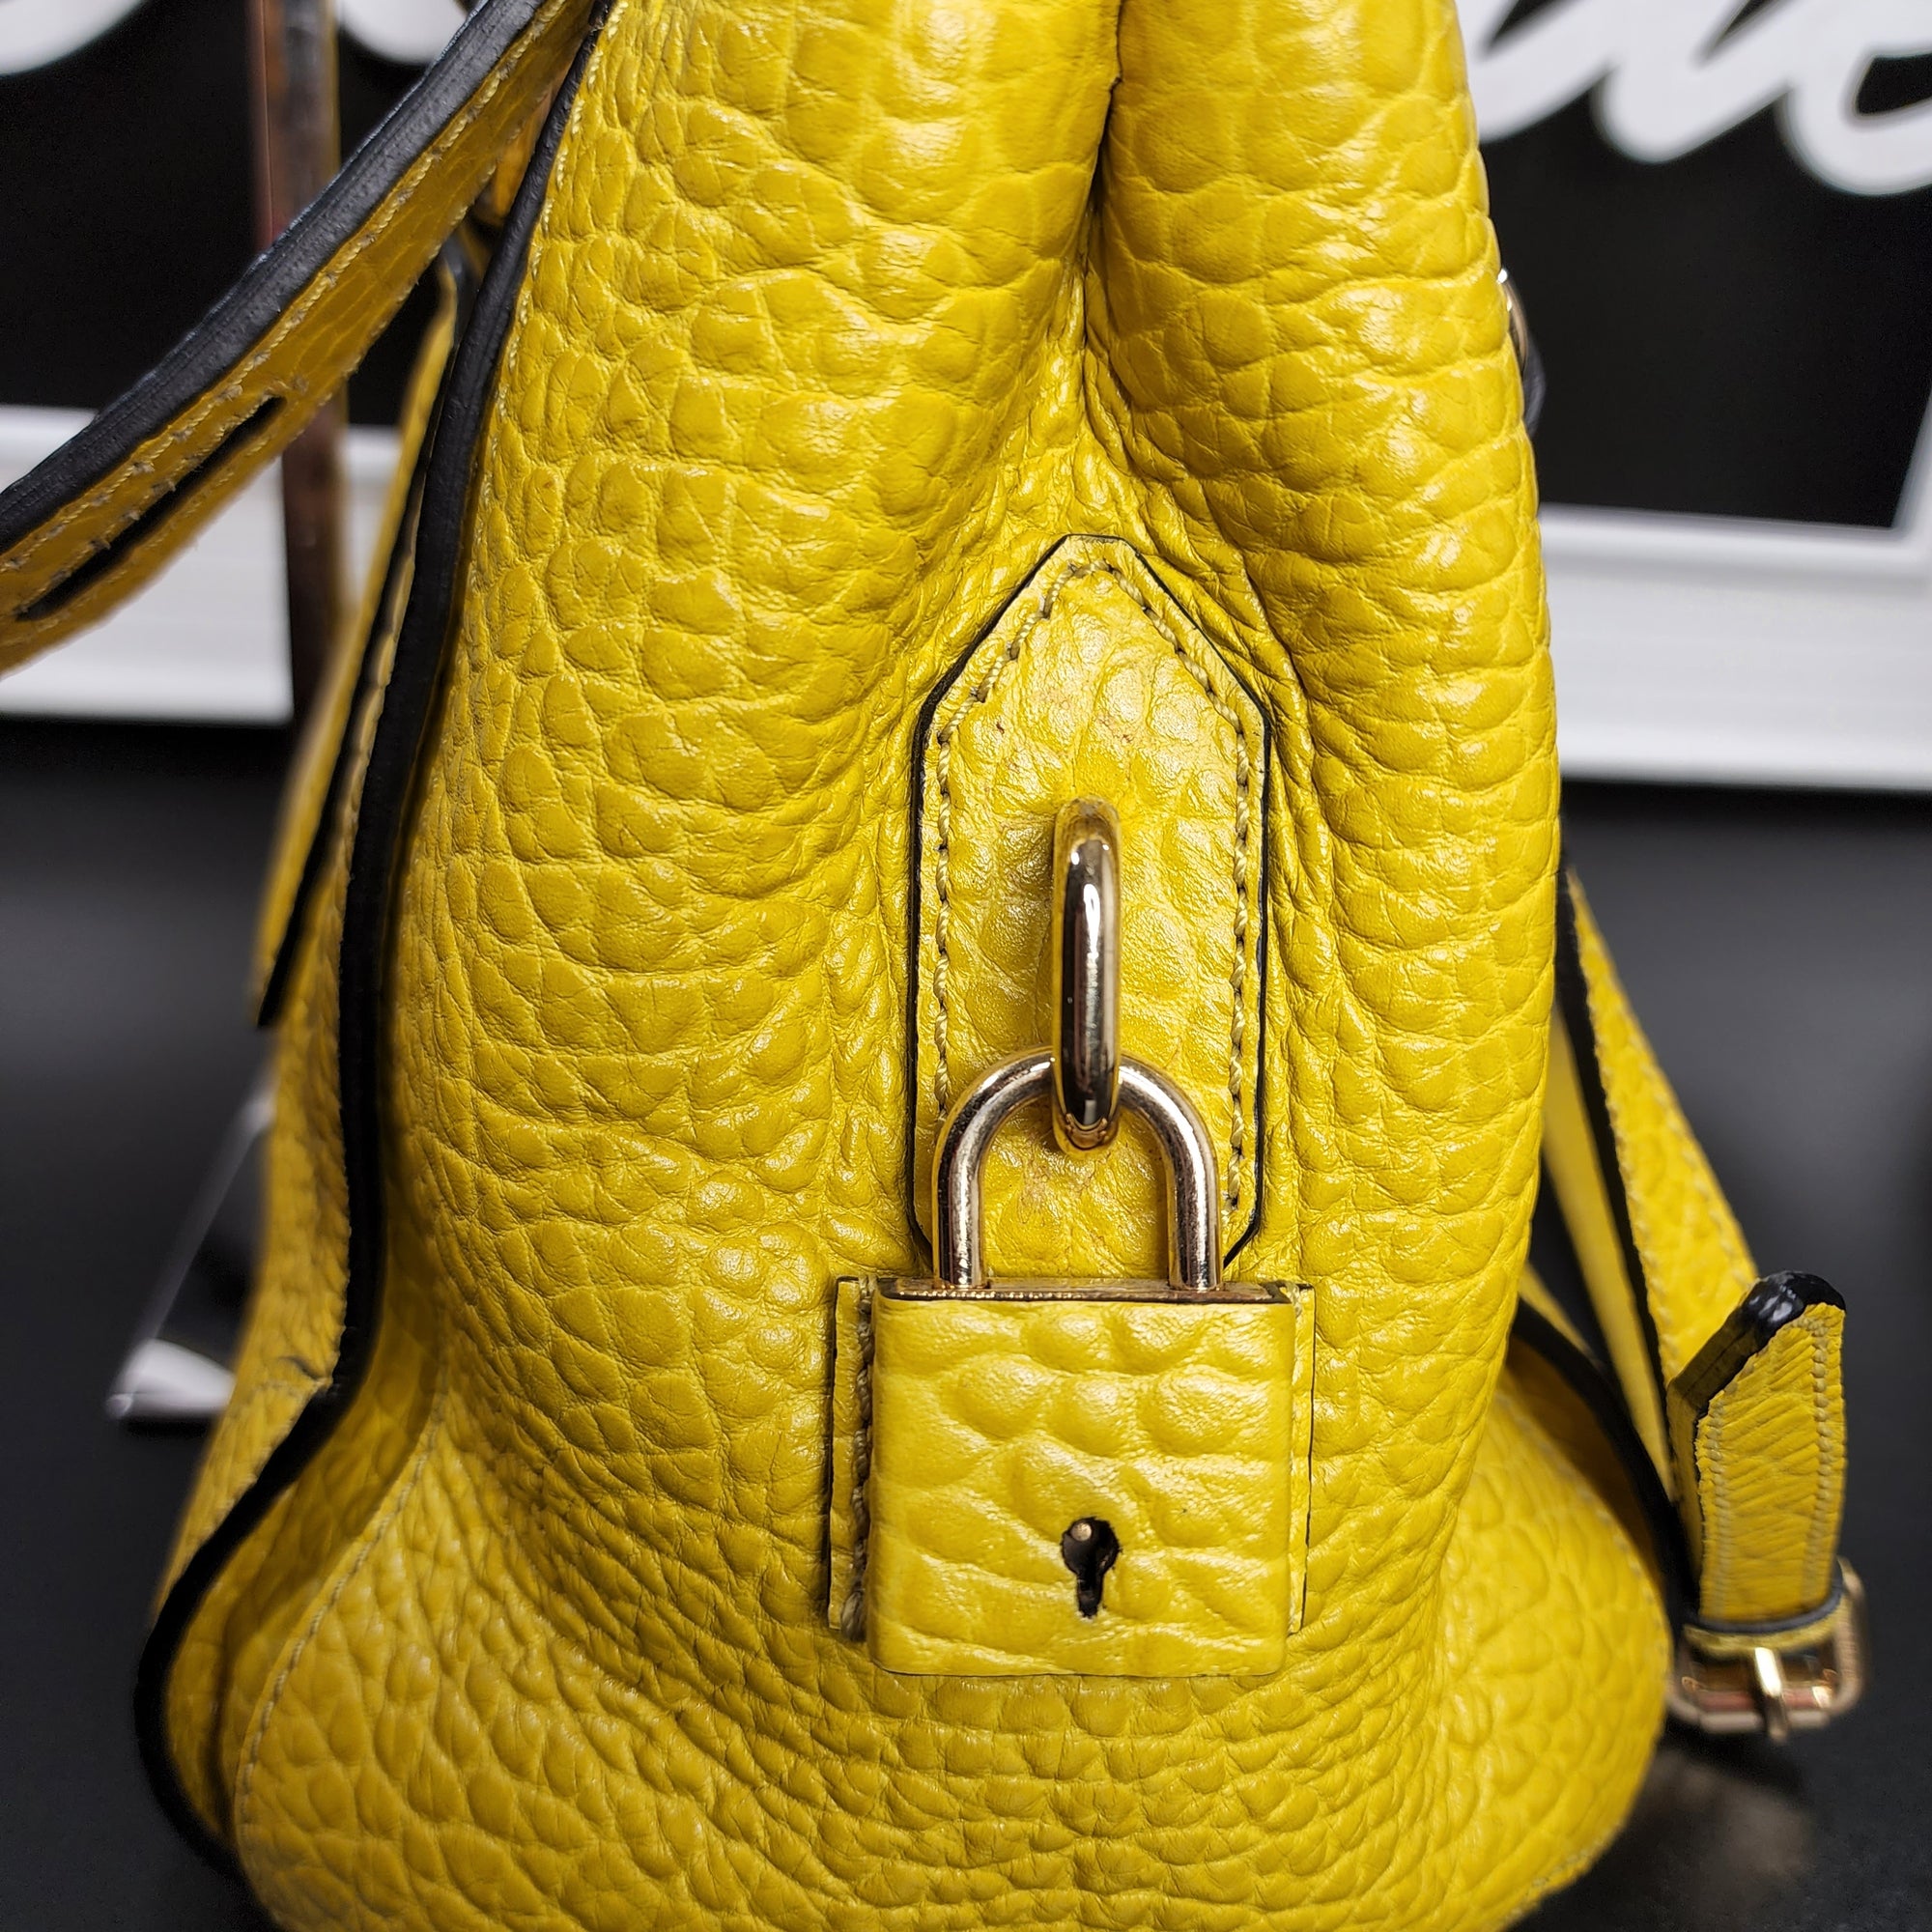 BURBERRY PRORSUM YELLOW PEBBLED LEATHER TOTE BAG NEW